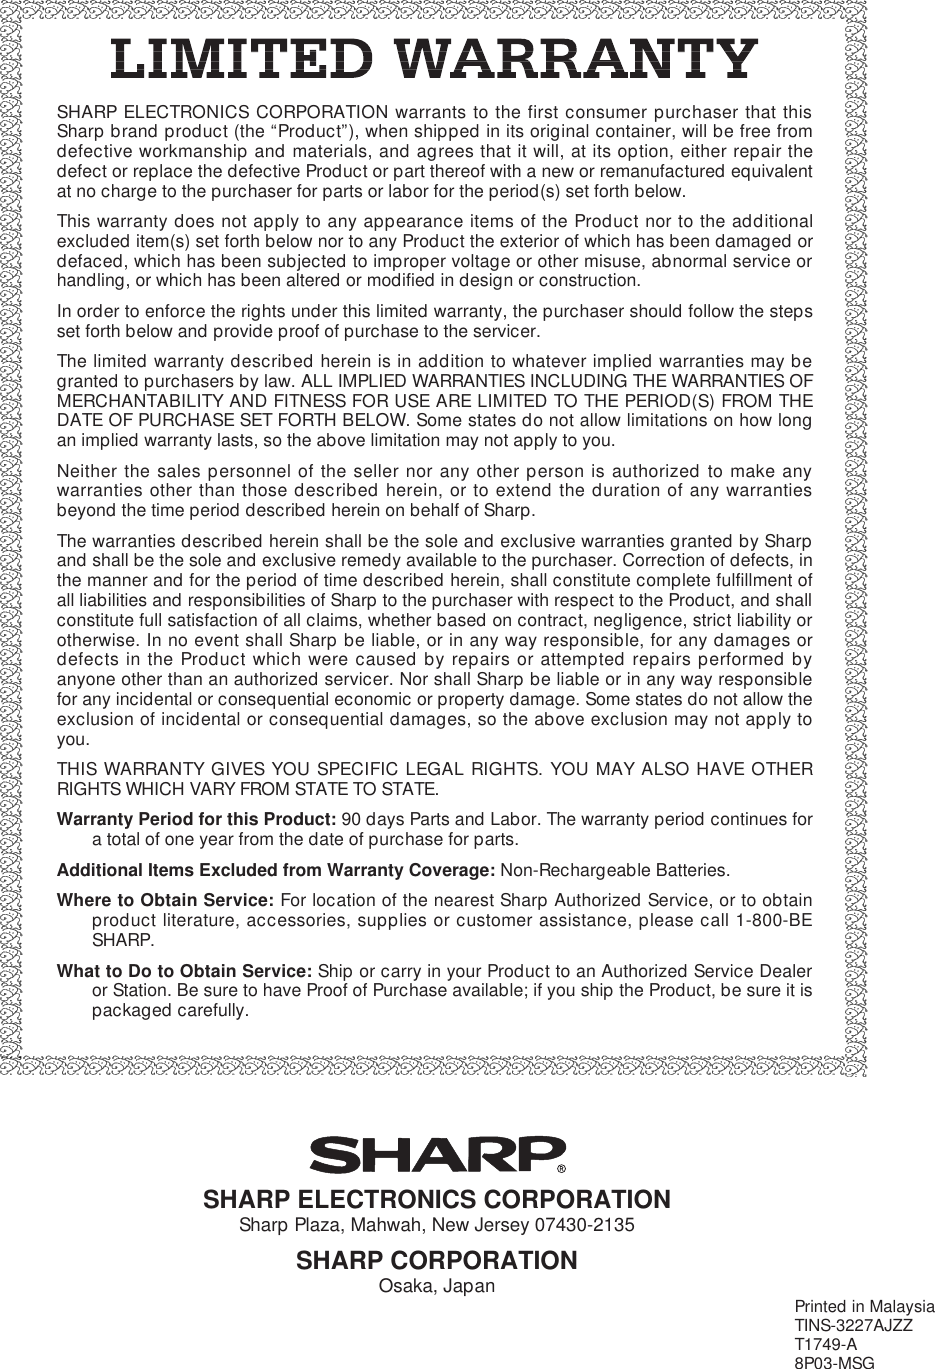 SHARP ELECTRONICS CORPORATION warrants to the first consumer purchaser that thisSharp brand product (the “Product”), when shipped in its original container, will be free fromdefective workmanship and materials, and agrees that it will, at its option, either repair thedefect or replace the defective Product or part thereof with a new or remanufactured equivalentat no charge to the purchaser for parts or labor for the period(s) set forth below.This warranty does not apply to any appearance items of the Product nor to the additionalexcluded item(s) set forth below nor to any Product the exterior of which has been damaged ordefaced, which has been subjected to improper voltage or other misuse, abnormal service orhandling, or which has been altered or modified in design or construction.In order to enforce the rights under this limited warranty, the purchaser should follow the stepsset forth below and provide proof of purchase to the servicer.The limited warranty described herein is in addition to whatever implied warranties may begranted to purchasers by law. ALL IMPLIED WARRANTIES INCLUDING THE WARRANTIES OFMERCHANTABILITY AND FITNESS FOR USE ARE LIMITED TO THE PERIOD(S) FROM THEDATE OF PURCHASE SET FORTH BELOW. Some states do not allow limitations on how longan implied warranty lasts, so the above limitation may not apply to you.Neither the sales personnel of the seller nor any other person is authorized to make anywarranties other than those described herein, or to extend the duration of any warrantiesbeyond the time period described herein on behalf of Sharp.The warranties described herein shall be the sole and exclusive warranties granted by Sharpand shall be the sole and exclusive remedy available to the purchaser. Correction of defects, inthe manner and for the period of time described herein, shall constitute complete fulfillment ofall liabilities and responsibilities of Sharp to the purchaser with respect to the Product, and shallconstitute full satisfaction of all claims, whether based on contract, negligence, strict liability orotherwise. In no event shall Sharp be liable, or in any way responsible, for any damages ordefects in the Product which were caused by repairs or attempted repairs performed byanyone other than an authorized servicer. Nor shall Sharp be liable or in any way responsiblefor any incidental or consequential economic or property damage. Some states do not allow theexclusion of incidental or consequential damages, so the above exclusion may not apply toyou.THIS WARRANTY GIVES YOU SPECIFIC LEGAL RIGHTS. YOU MAY ALSO HAVE OTHERRIGHTS WHICH VARY FROM STATE TO STATE.Warranty Period for this Product: 90 days Parts and Labor. The warranty period continues fora total of one year from the date of purchase for parts.Additional Items Excluded from Warranty Coverage: Non-Rechargeable Batteries.Where to Obtain Service: For location of the nearest Sharp Authorized Service, or to obtainproduct literature, accessories, supplies or customer assistance, please call 1-800-BESHARP.What to Do to Obtain Service: Ship or carry in your Product to an Authorized Service Dealeror Station. Be sure to have Proof of Purchase available; if you ship the Product, be sure it ispackaged carefully.SHARP ELECTRONICS CORPORATIONSharp Plaza, Mahwah, New Jersey 07430-2135SHARP CORPORATIONOsaka, Japan Printed in MalaysiaTINS-3227AJZZT1749-A8P03-MSG